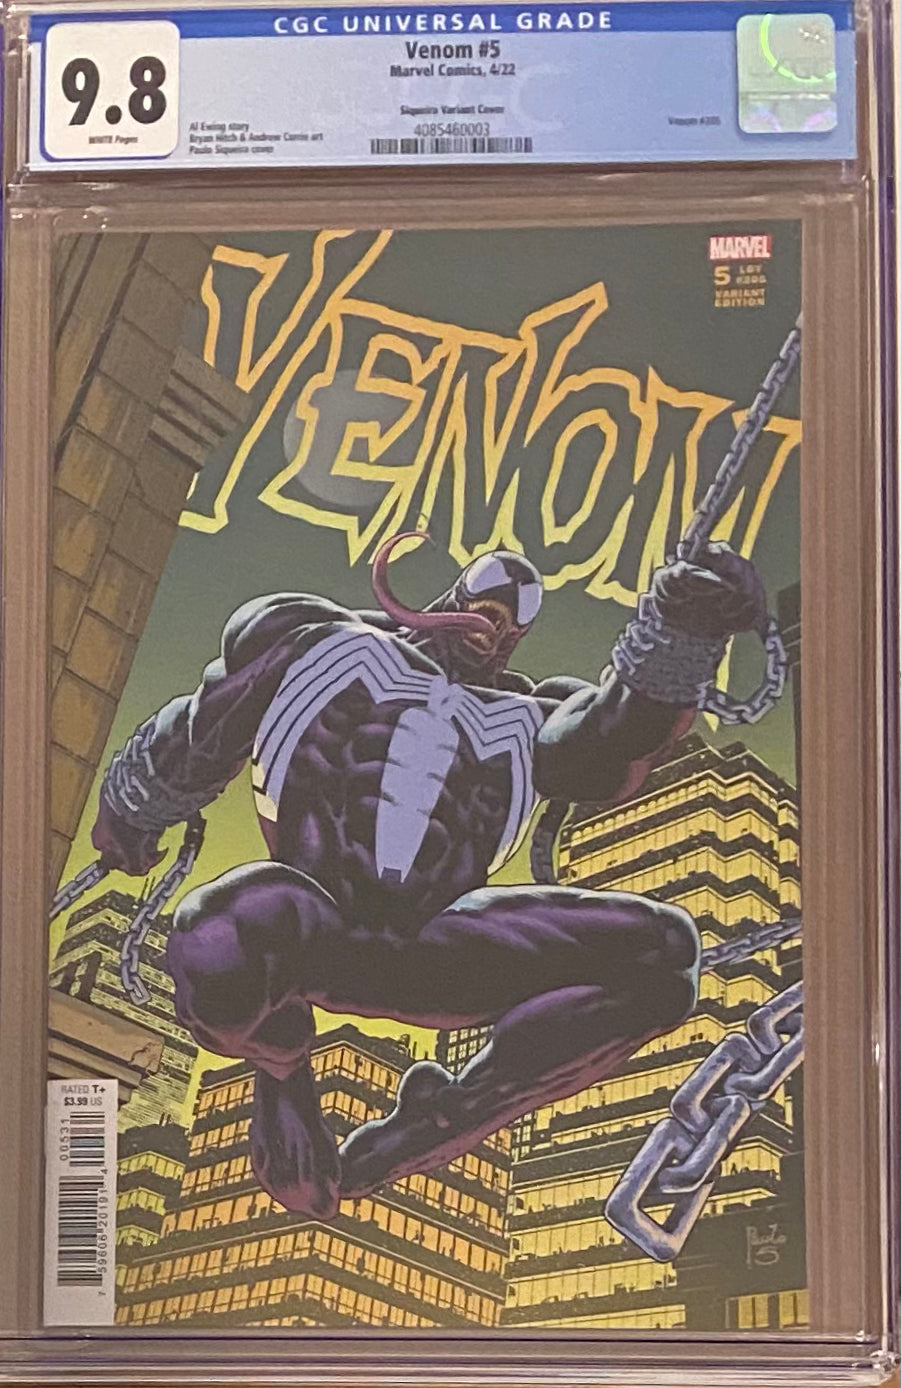 Venom #5 Siqueira 1:25 Retailer Incentive Variant CGC 9.8 - First Kings in Black